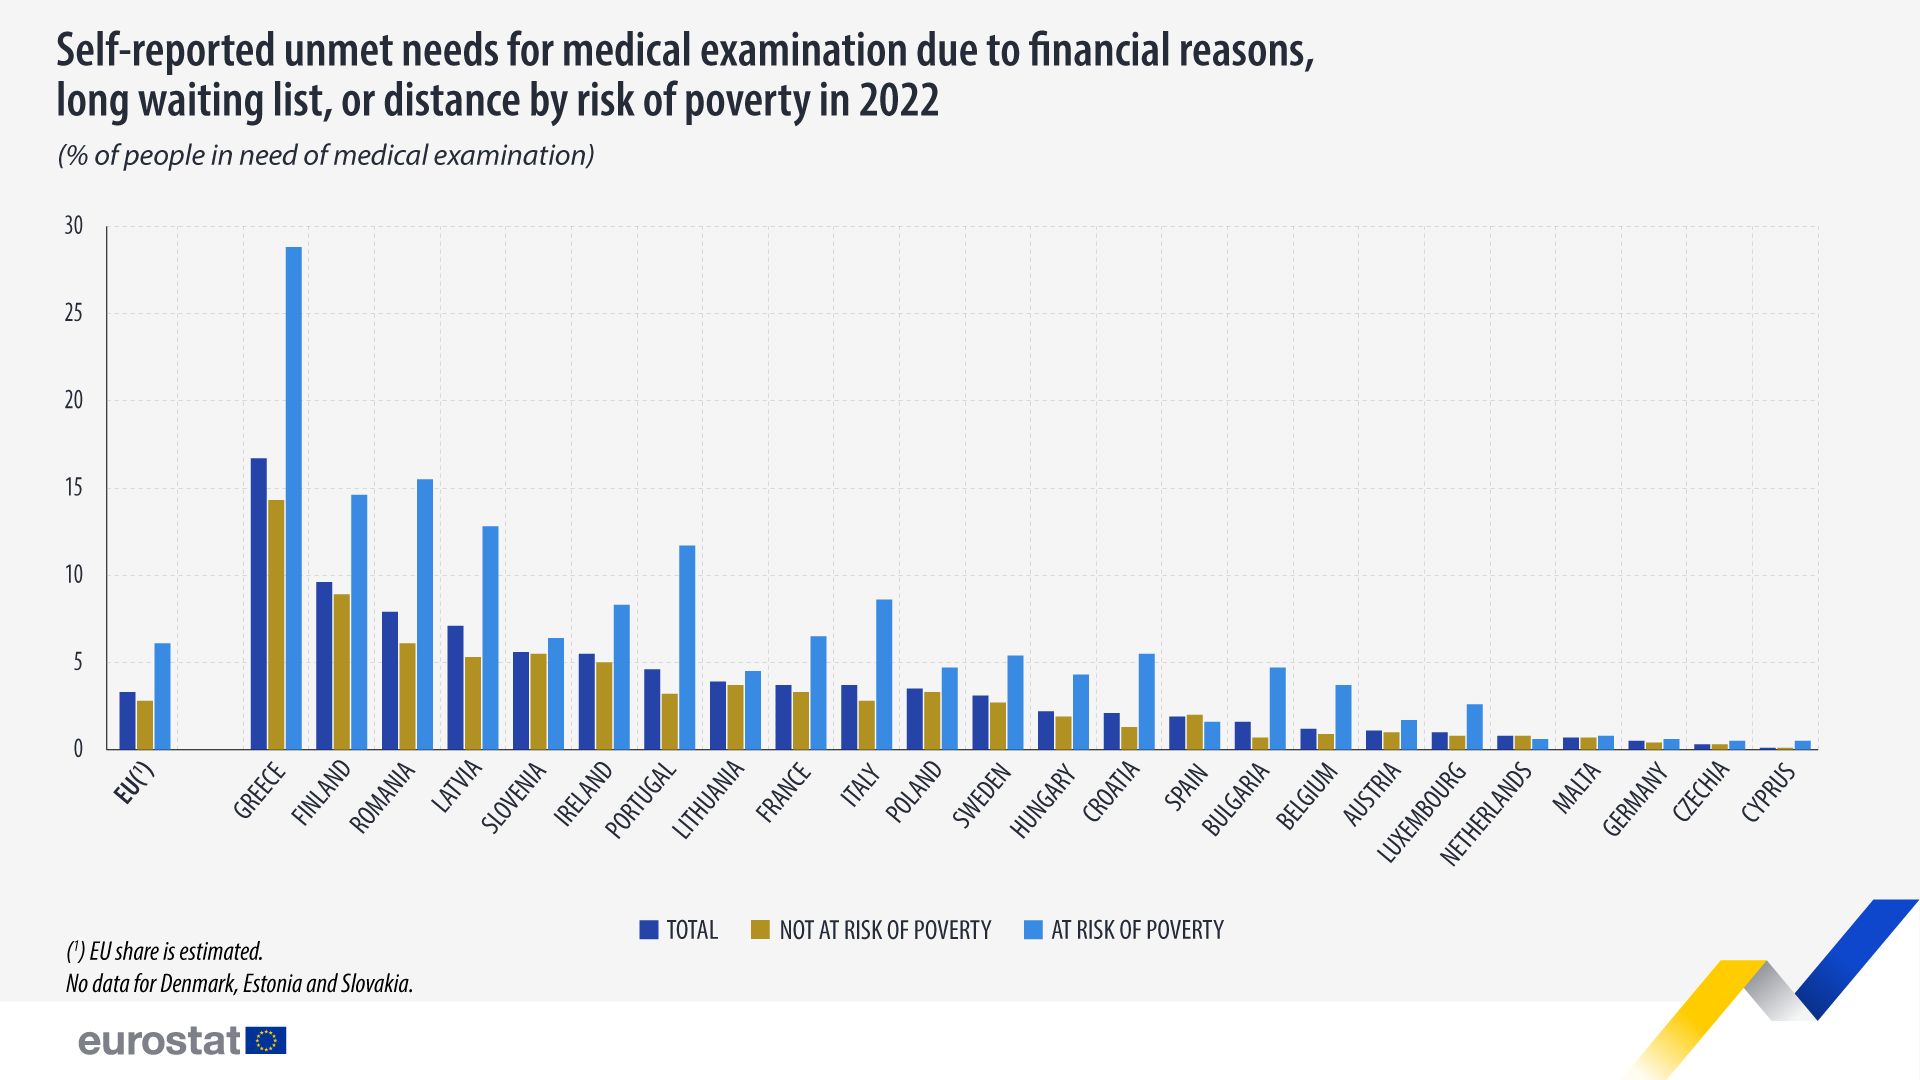 Self reported unmet needs for medical examinations due to financial reasons, waiting lists or distance, 2022, % of those in need of examination